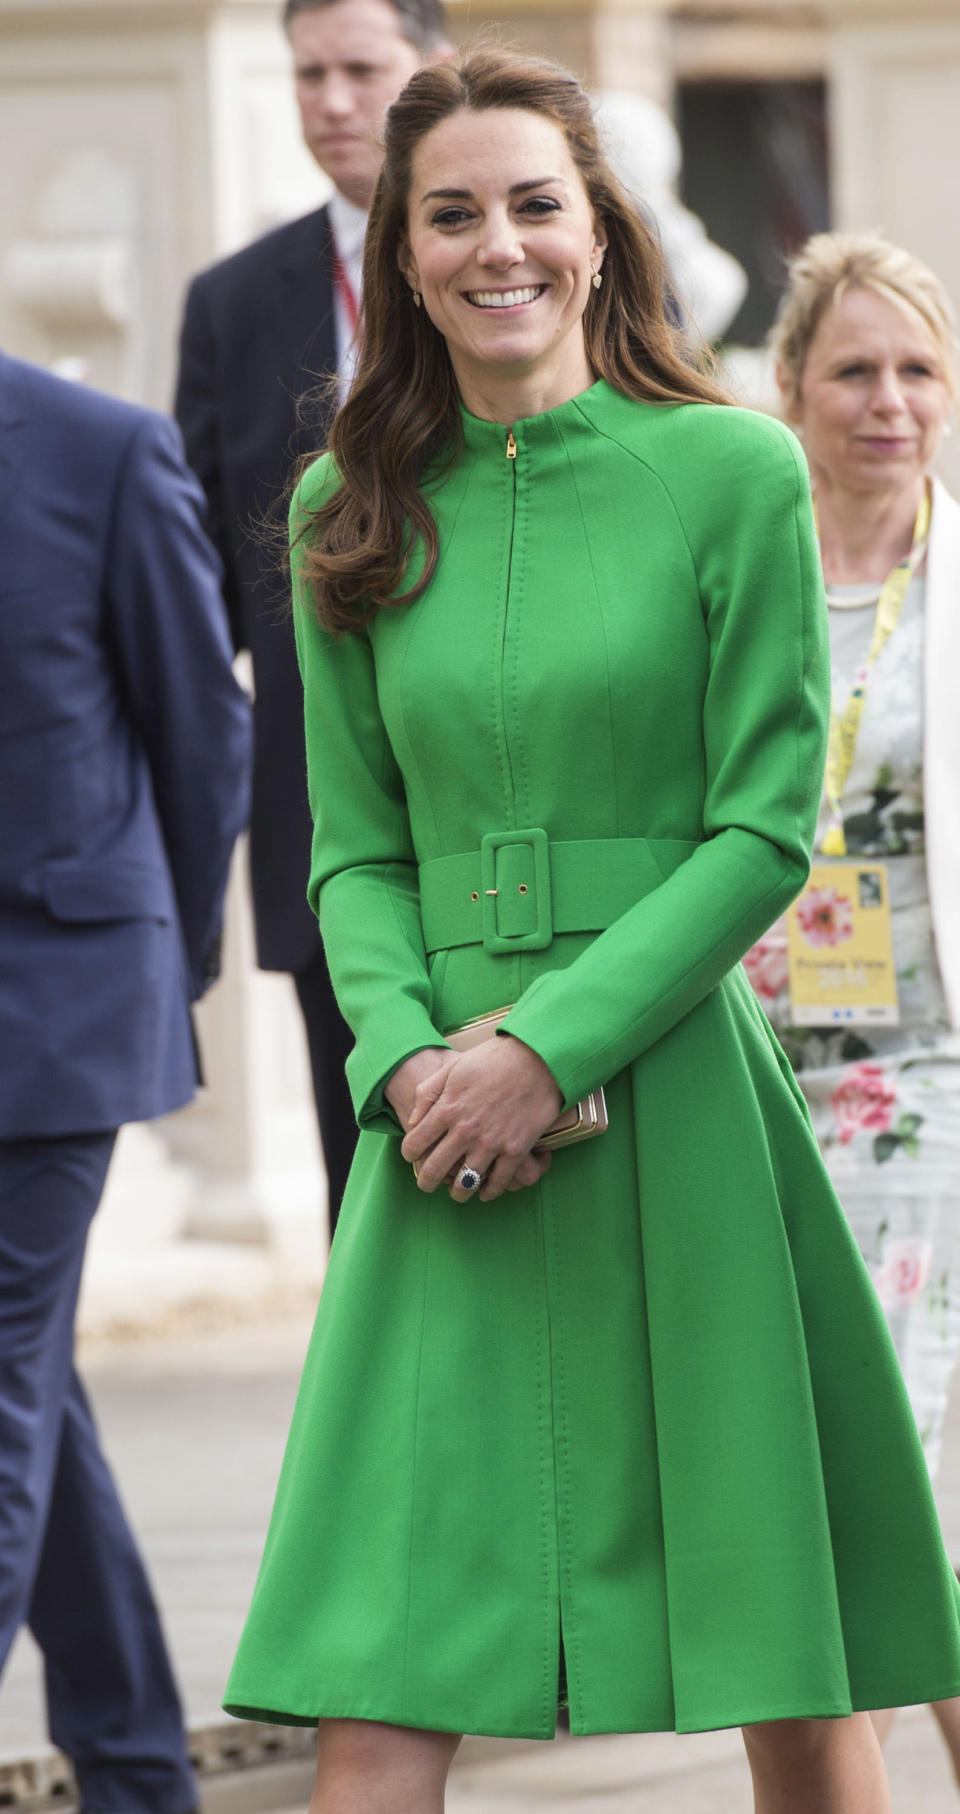 LONDON, ENGLAND - MAY 23:  Catherine, Duchess of Cambridge attends Chelsea Flower Show press day at Royal Hospital Chelsea on May 23, 2016 in London, England. The prestigious gardening show features hundreds of stands and exhibition gardens.  (Photo by Mark Cuthbert/UK Press via Getty Images)